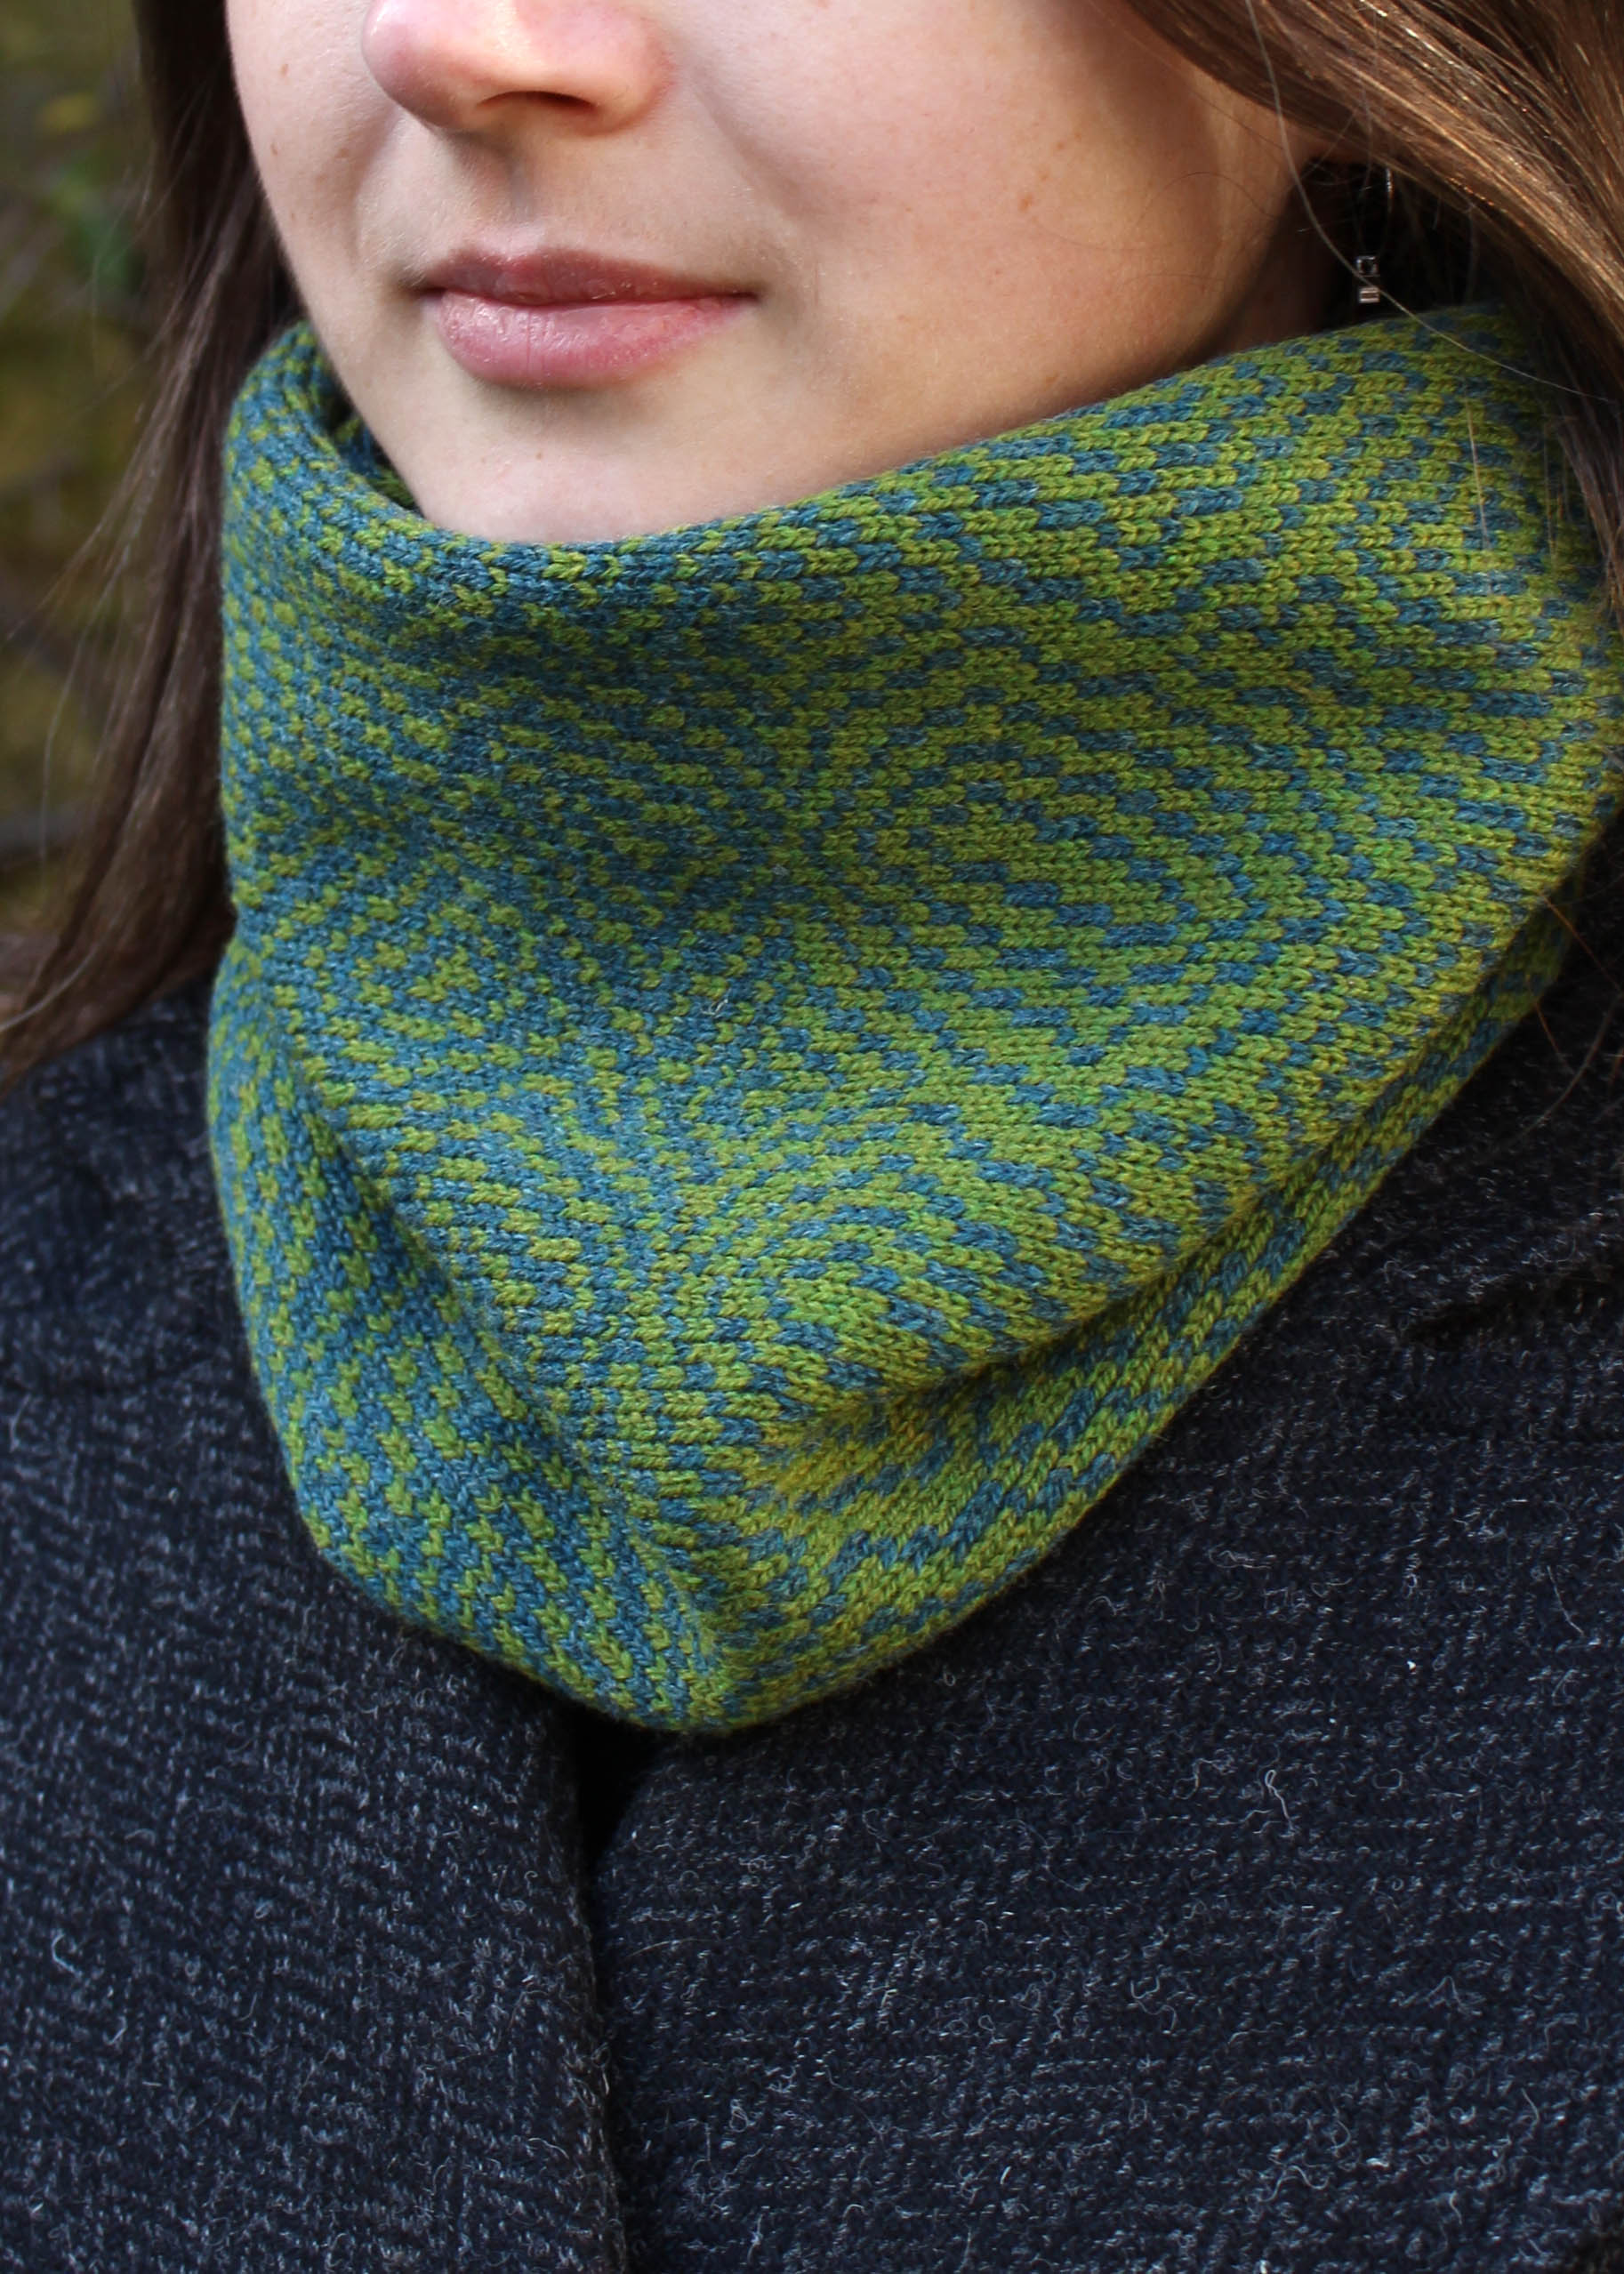 Merino lambswool neck warmer in shades of moss green with a design inspired by map contours.